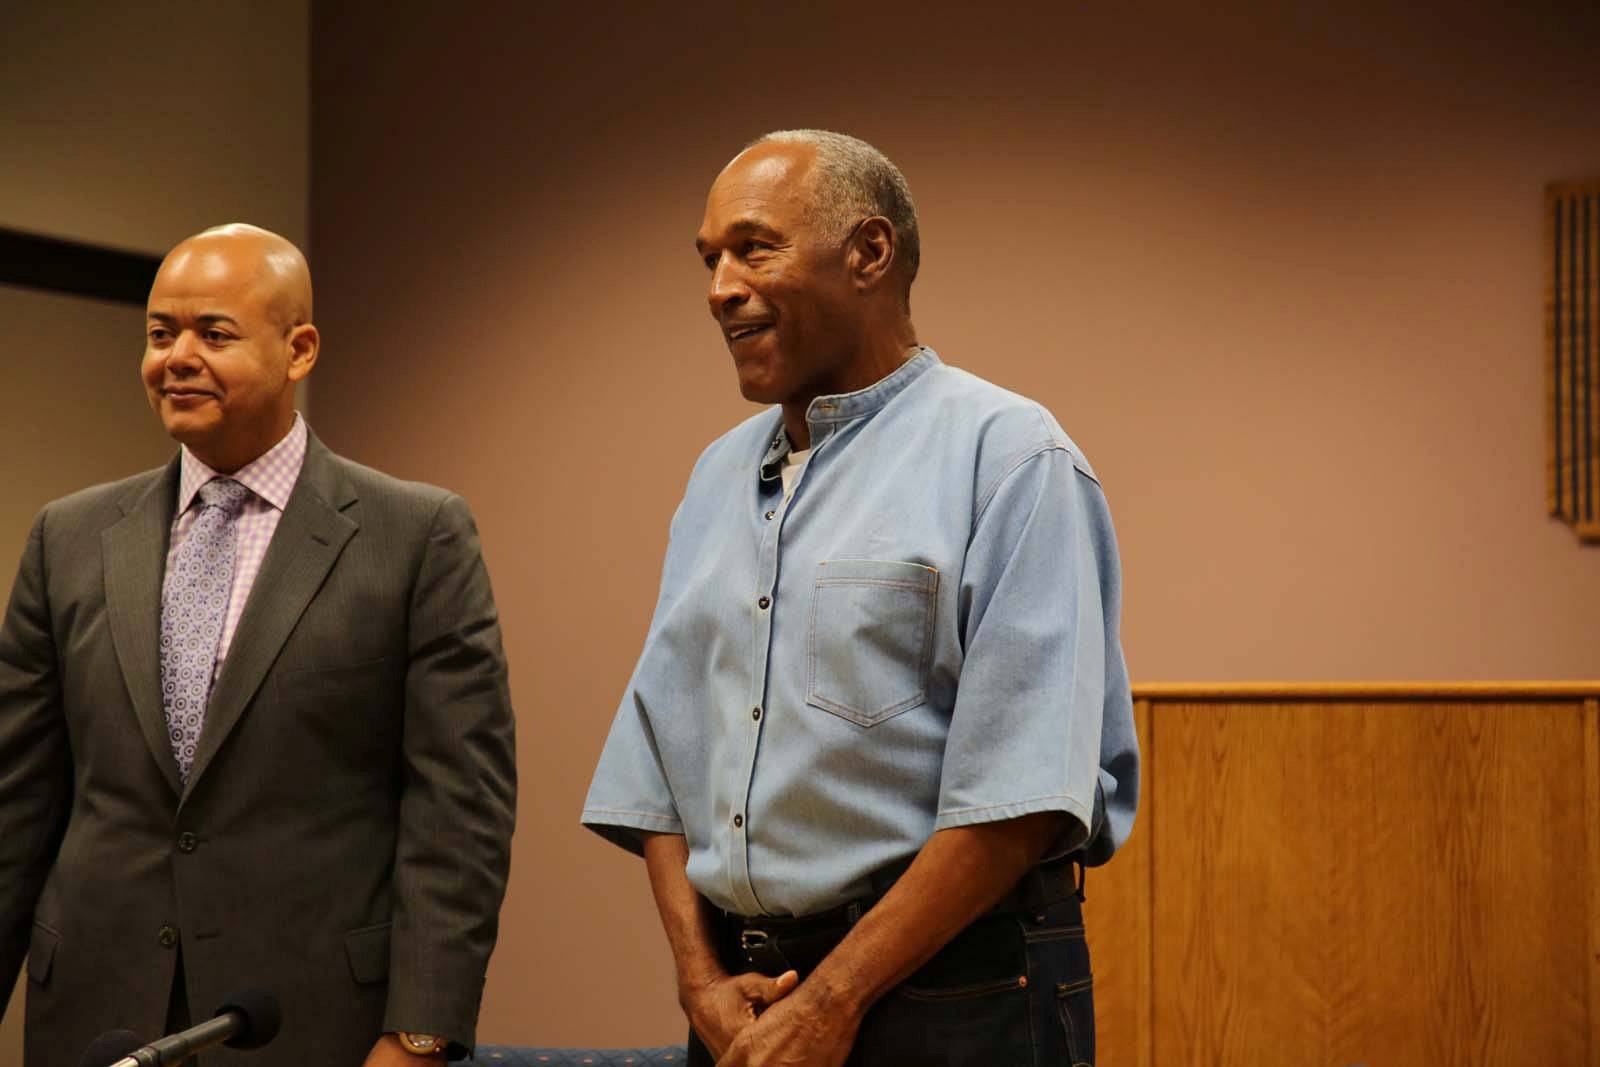 O.J. Simpson arrives for his parole hearing with attorney Malcolm LaVergne